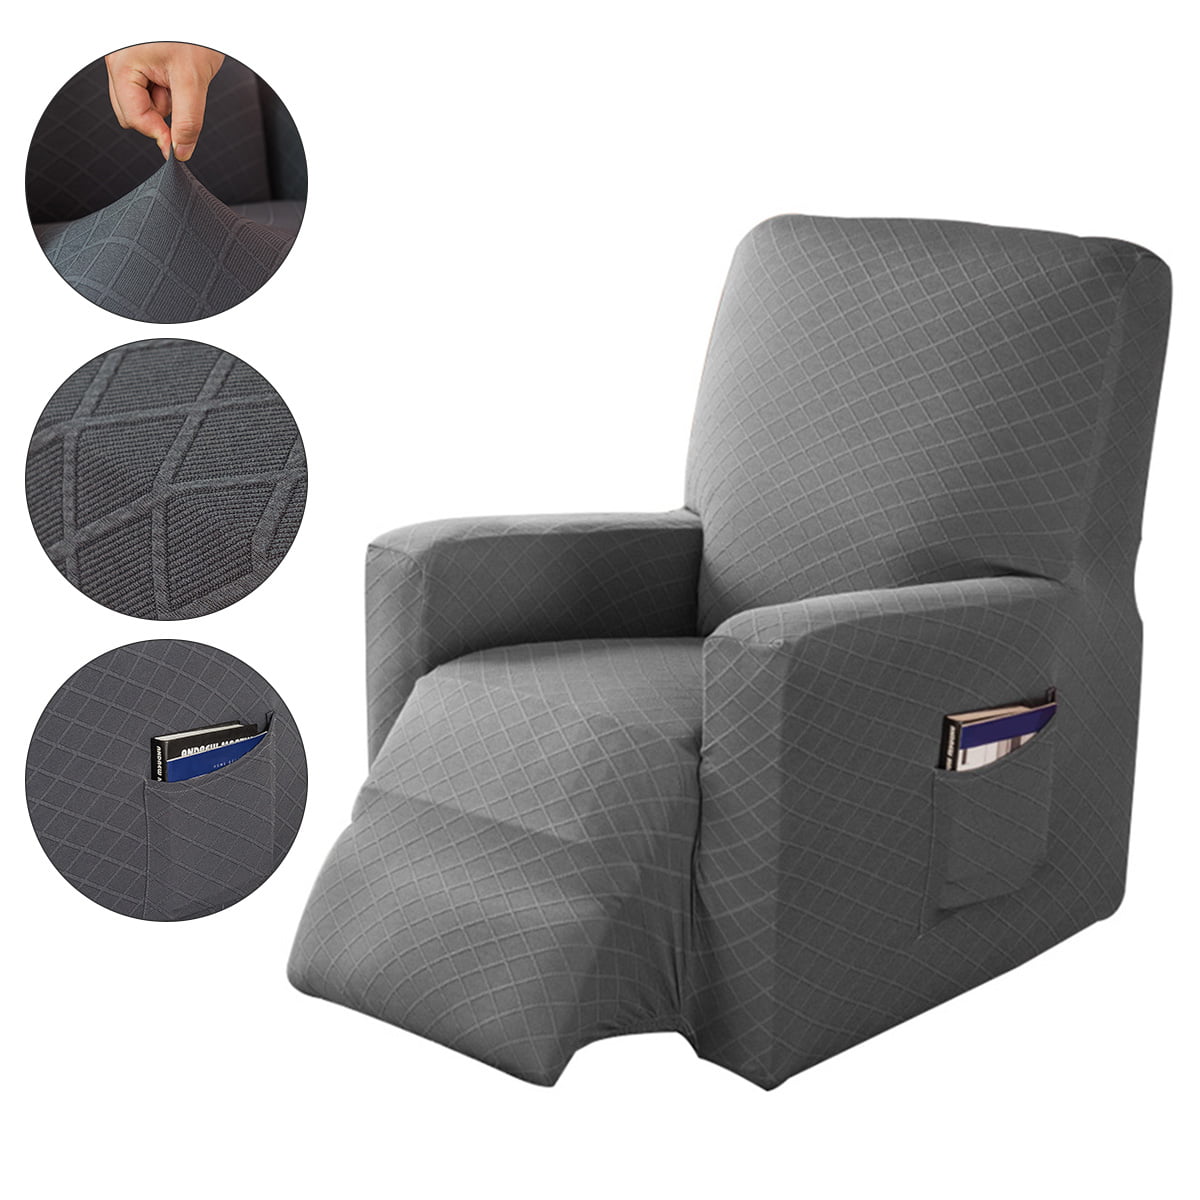 Washable Non Slip Elastic Fabric Armchair Recliner Chair Slipcovers Furniture Protector with Side Storage Bag Dyda6 Stretch Recliner Chair Cover 